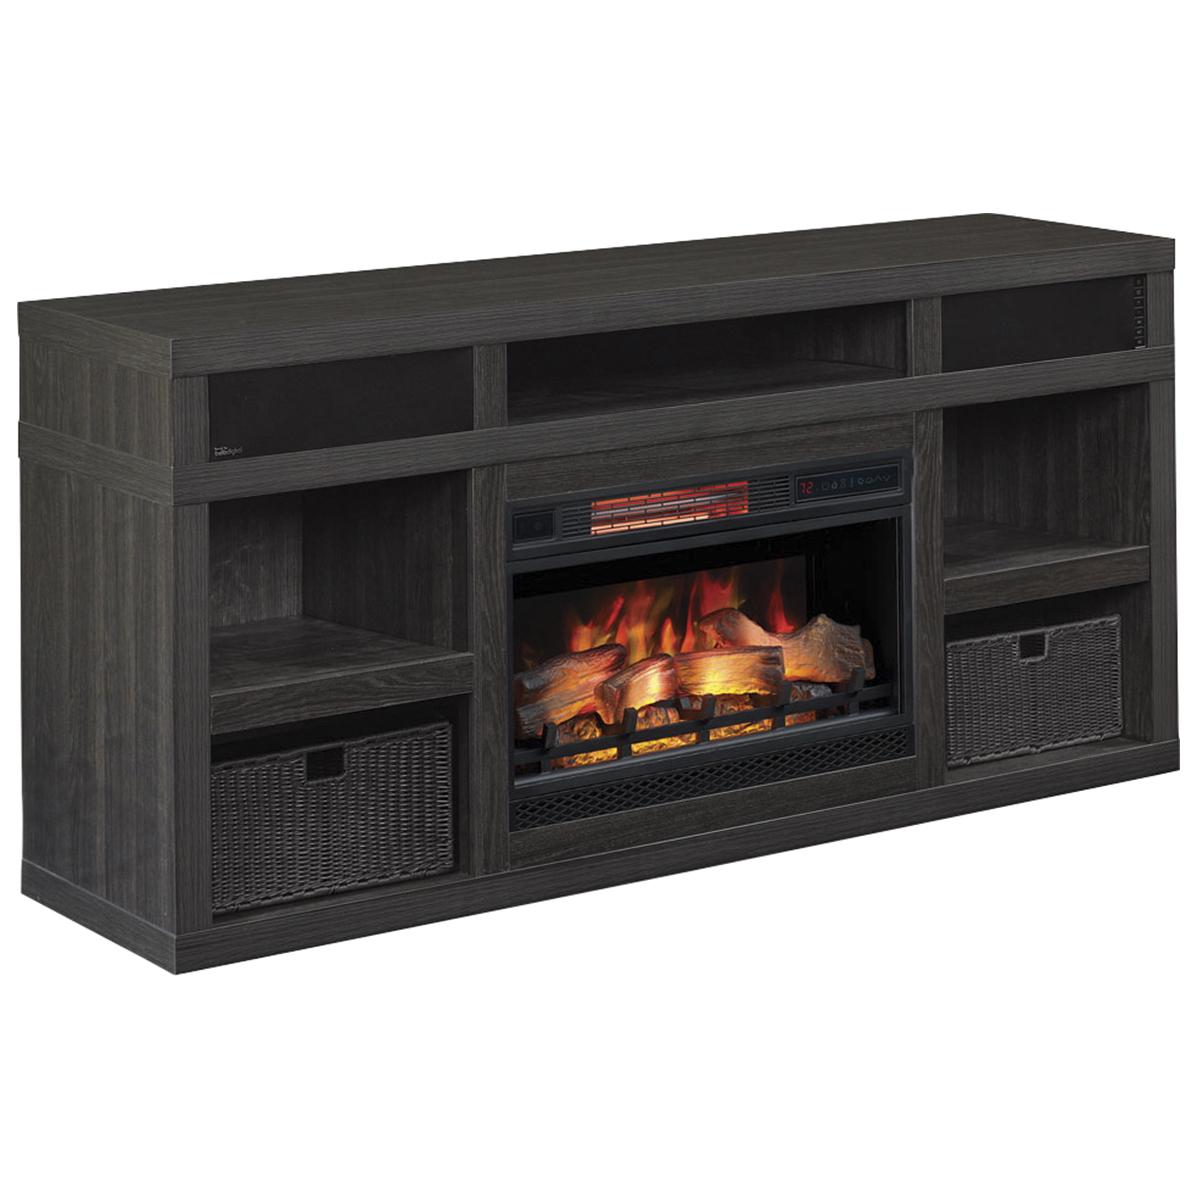 Small Wall Fireplace New Fabio Flames Greatlin 3 Piece Fireplace Entertainment Wall